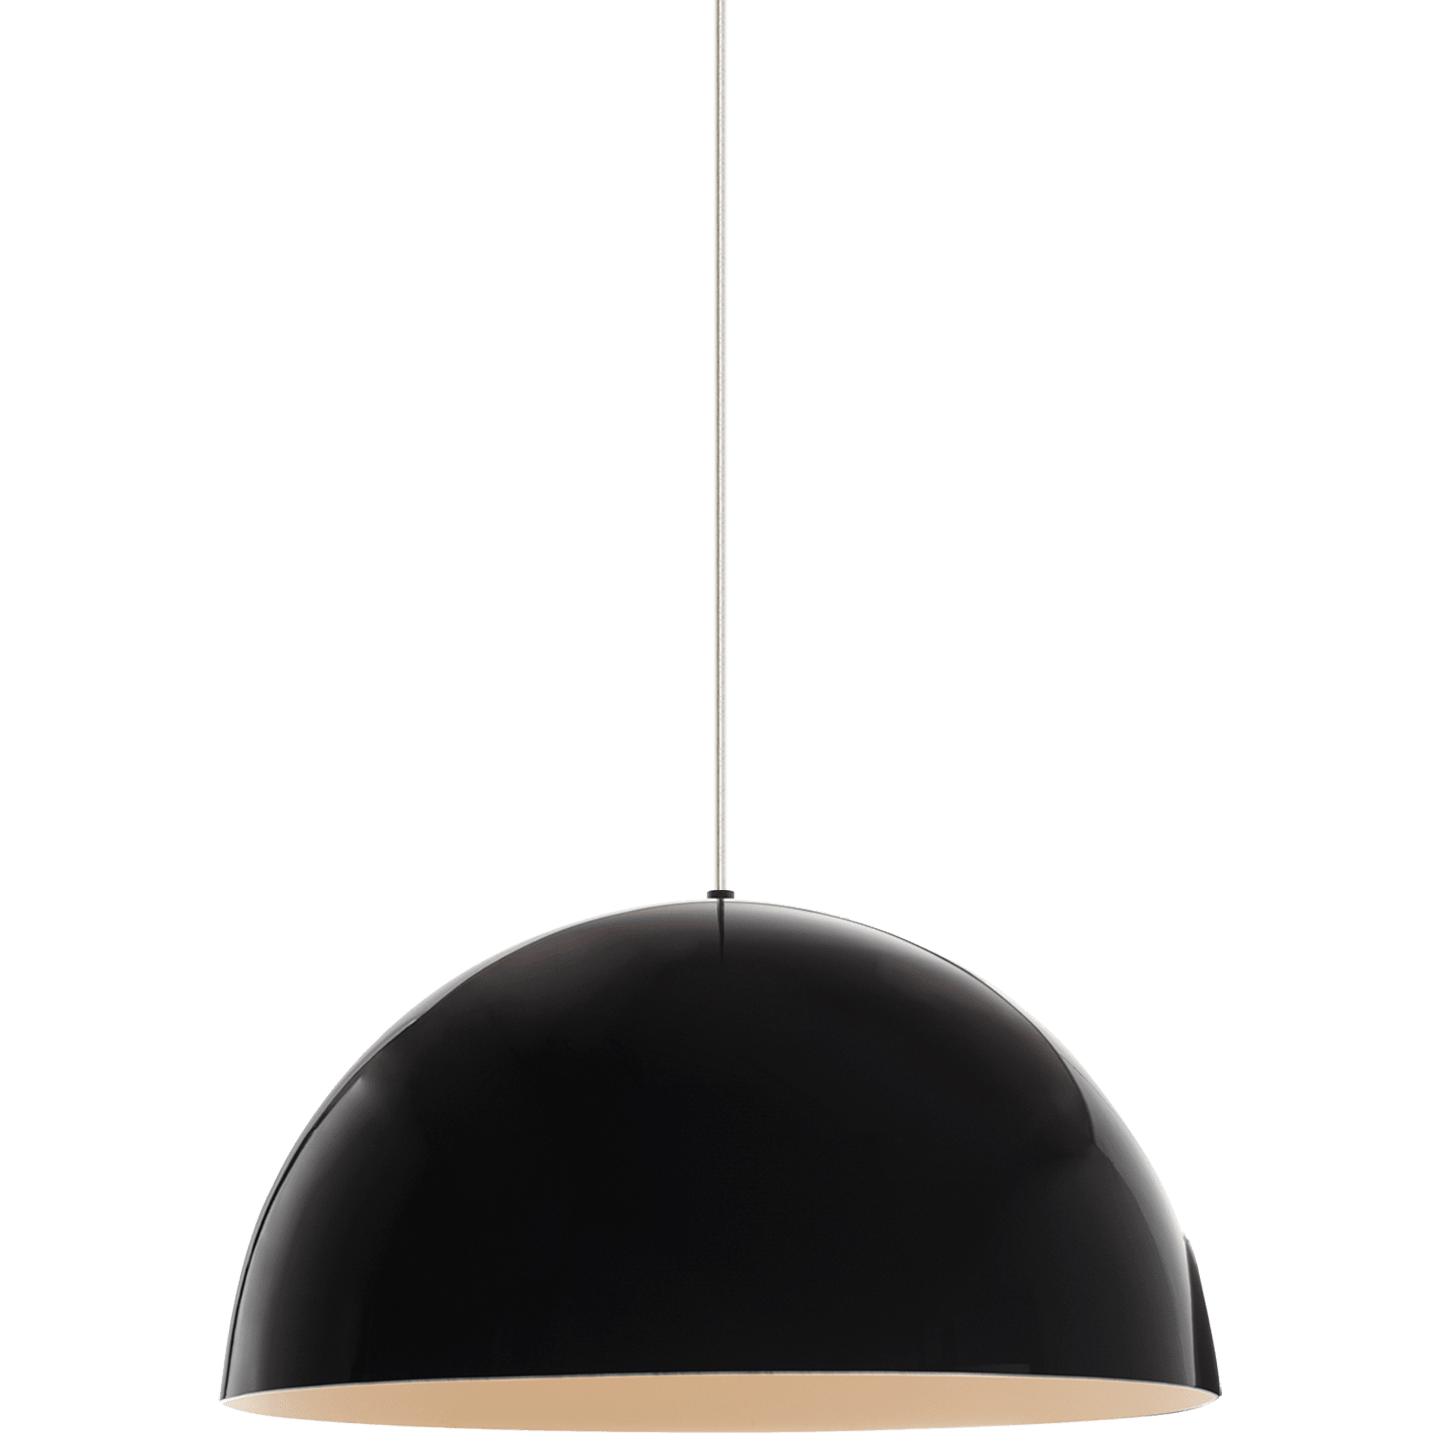 Satin Nickel Gloss Black/White Lamp Not Included